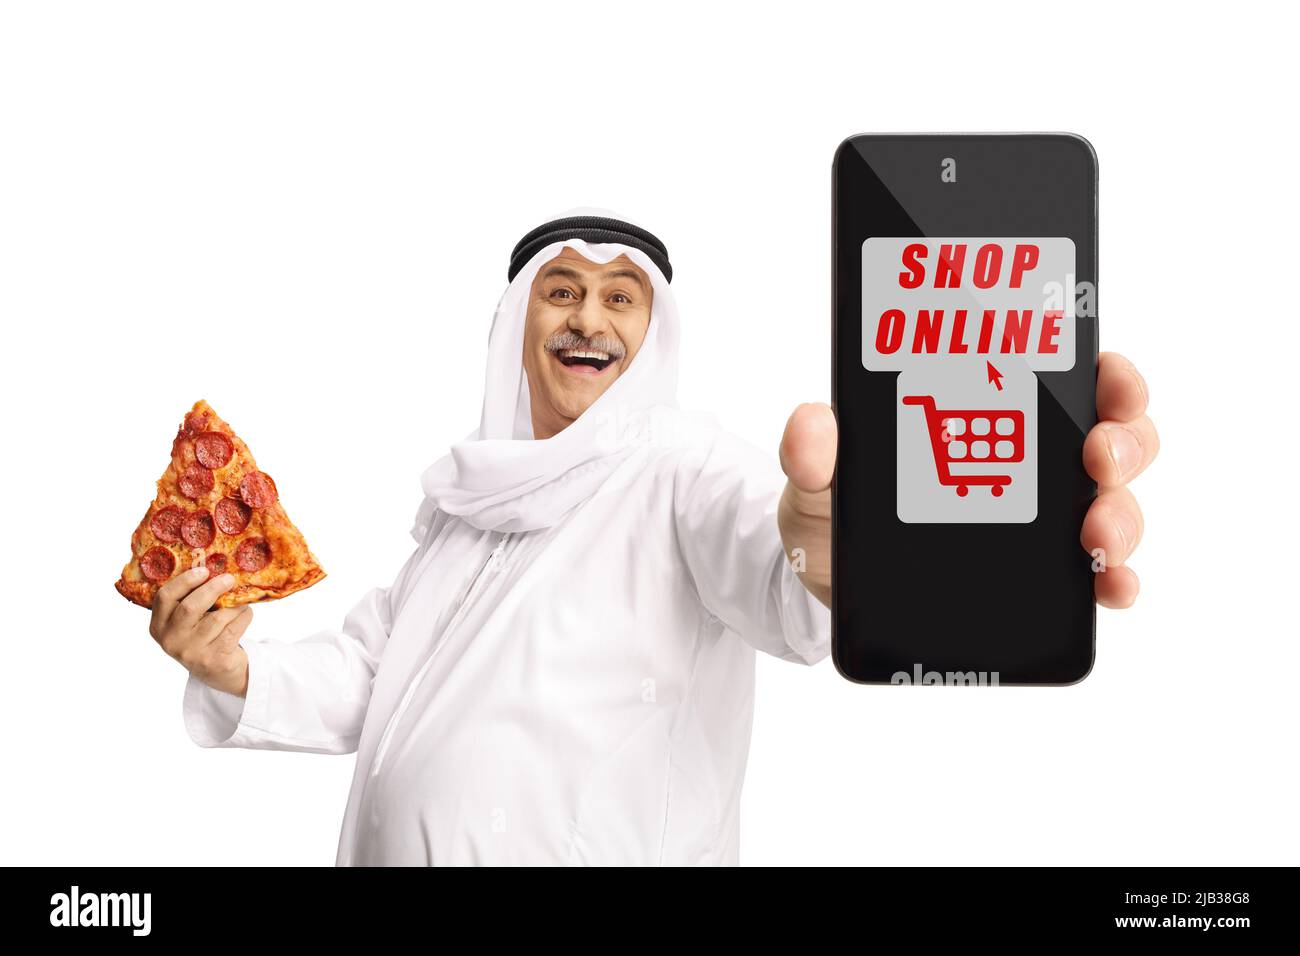 Mature arab man holding pepperoni pizza slice and showing a smartphone for online order isolated on white background Stock Photo